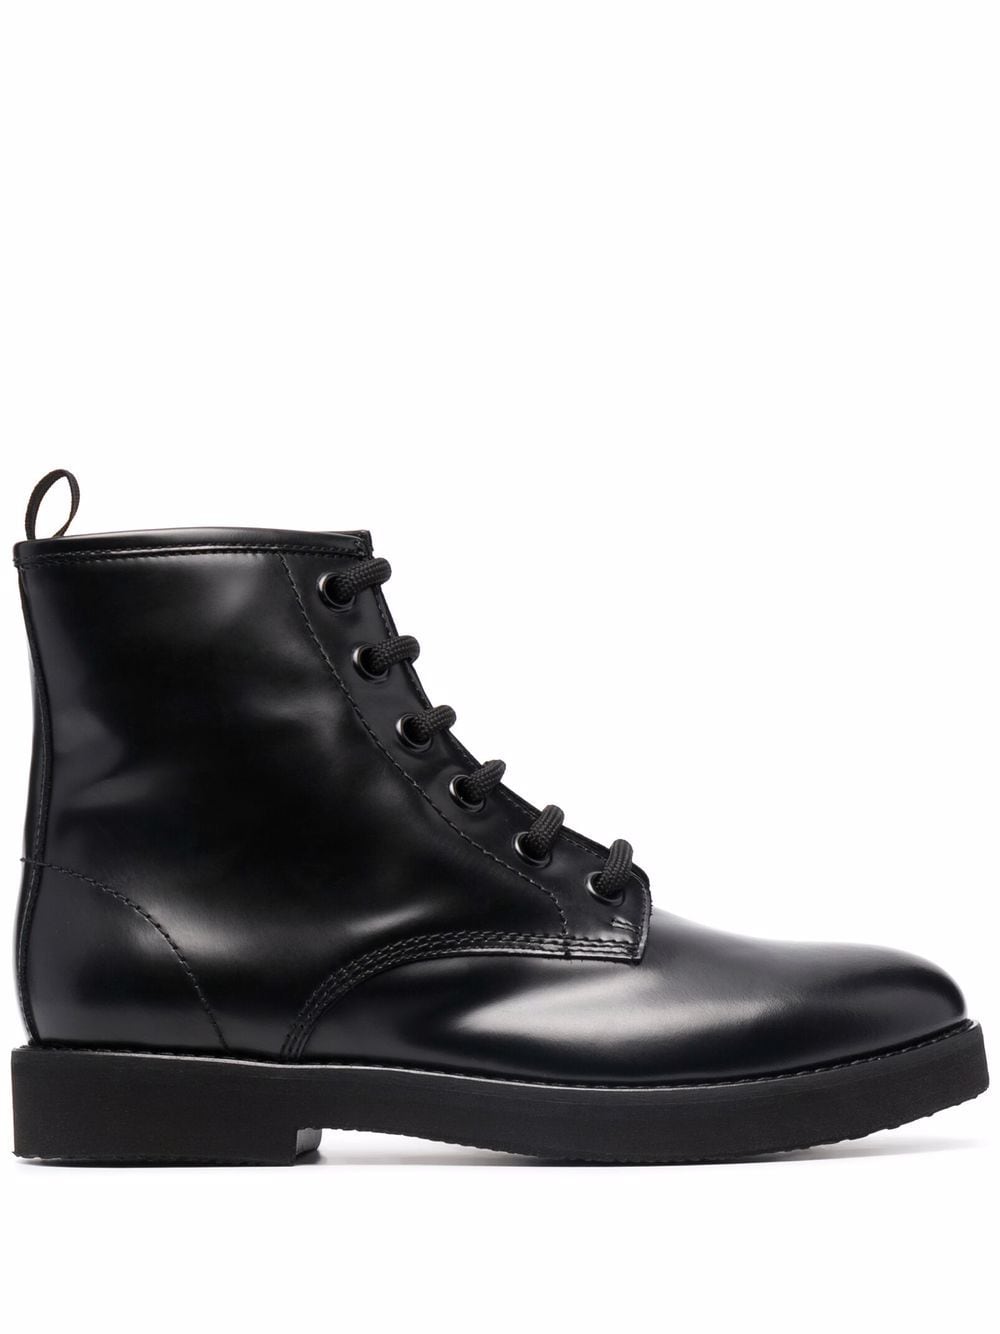 AGL Moreen lace-up boots - Black von AGL